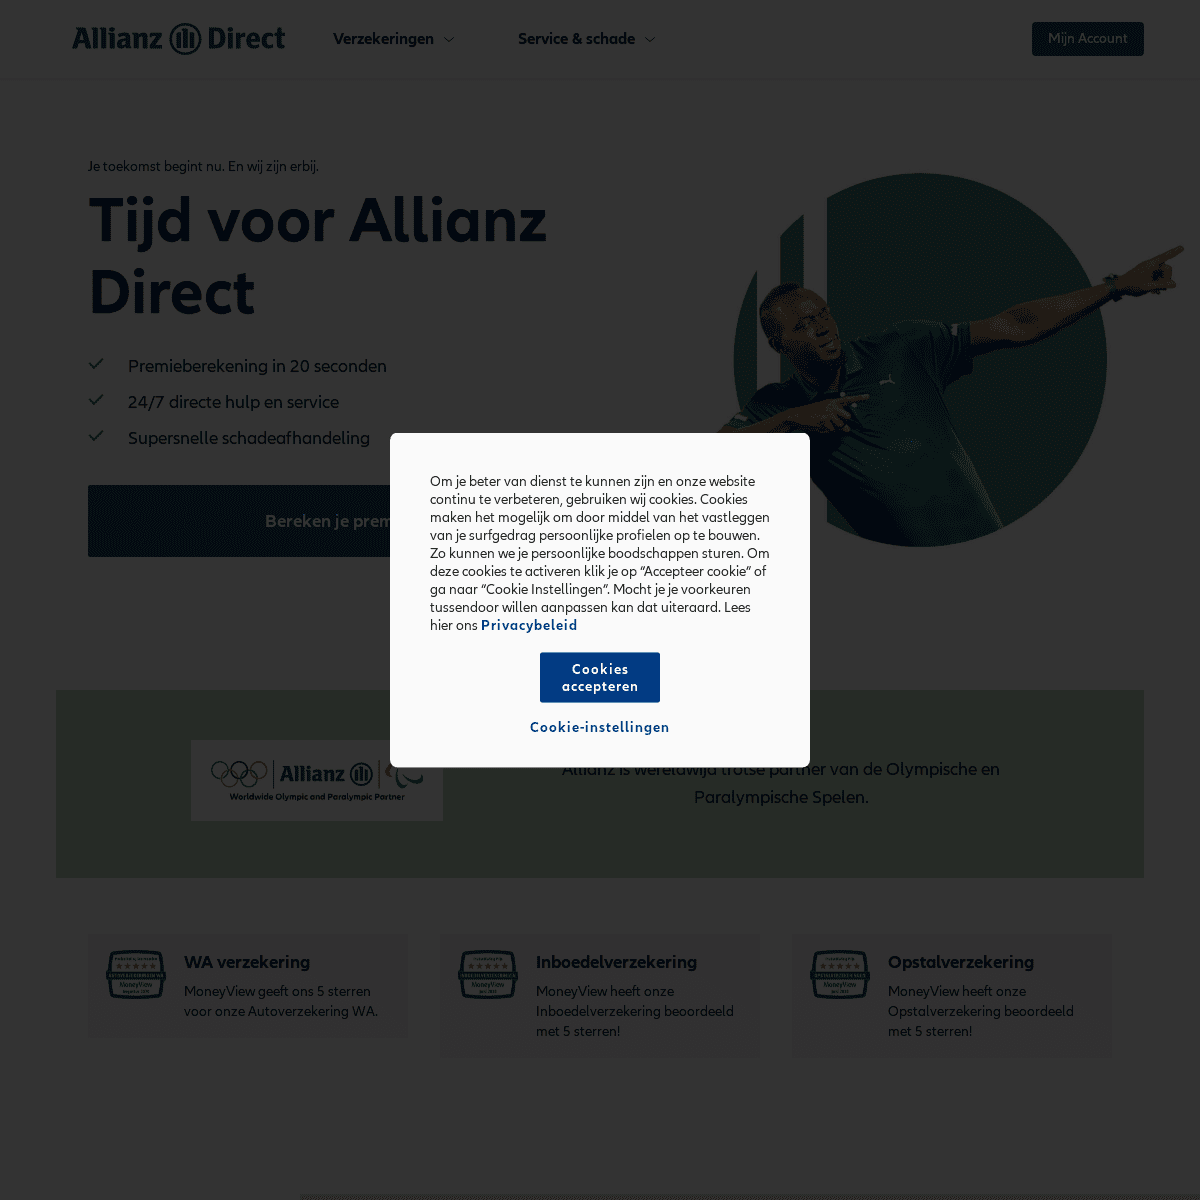 A complete backup of https://allianzdirect.nl